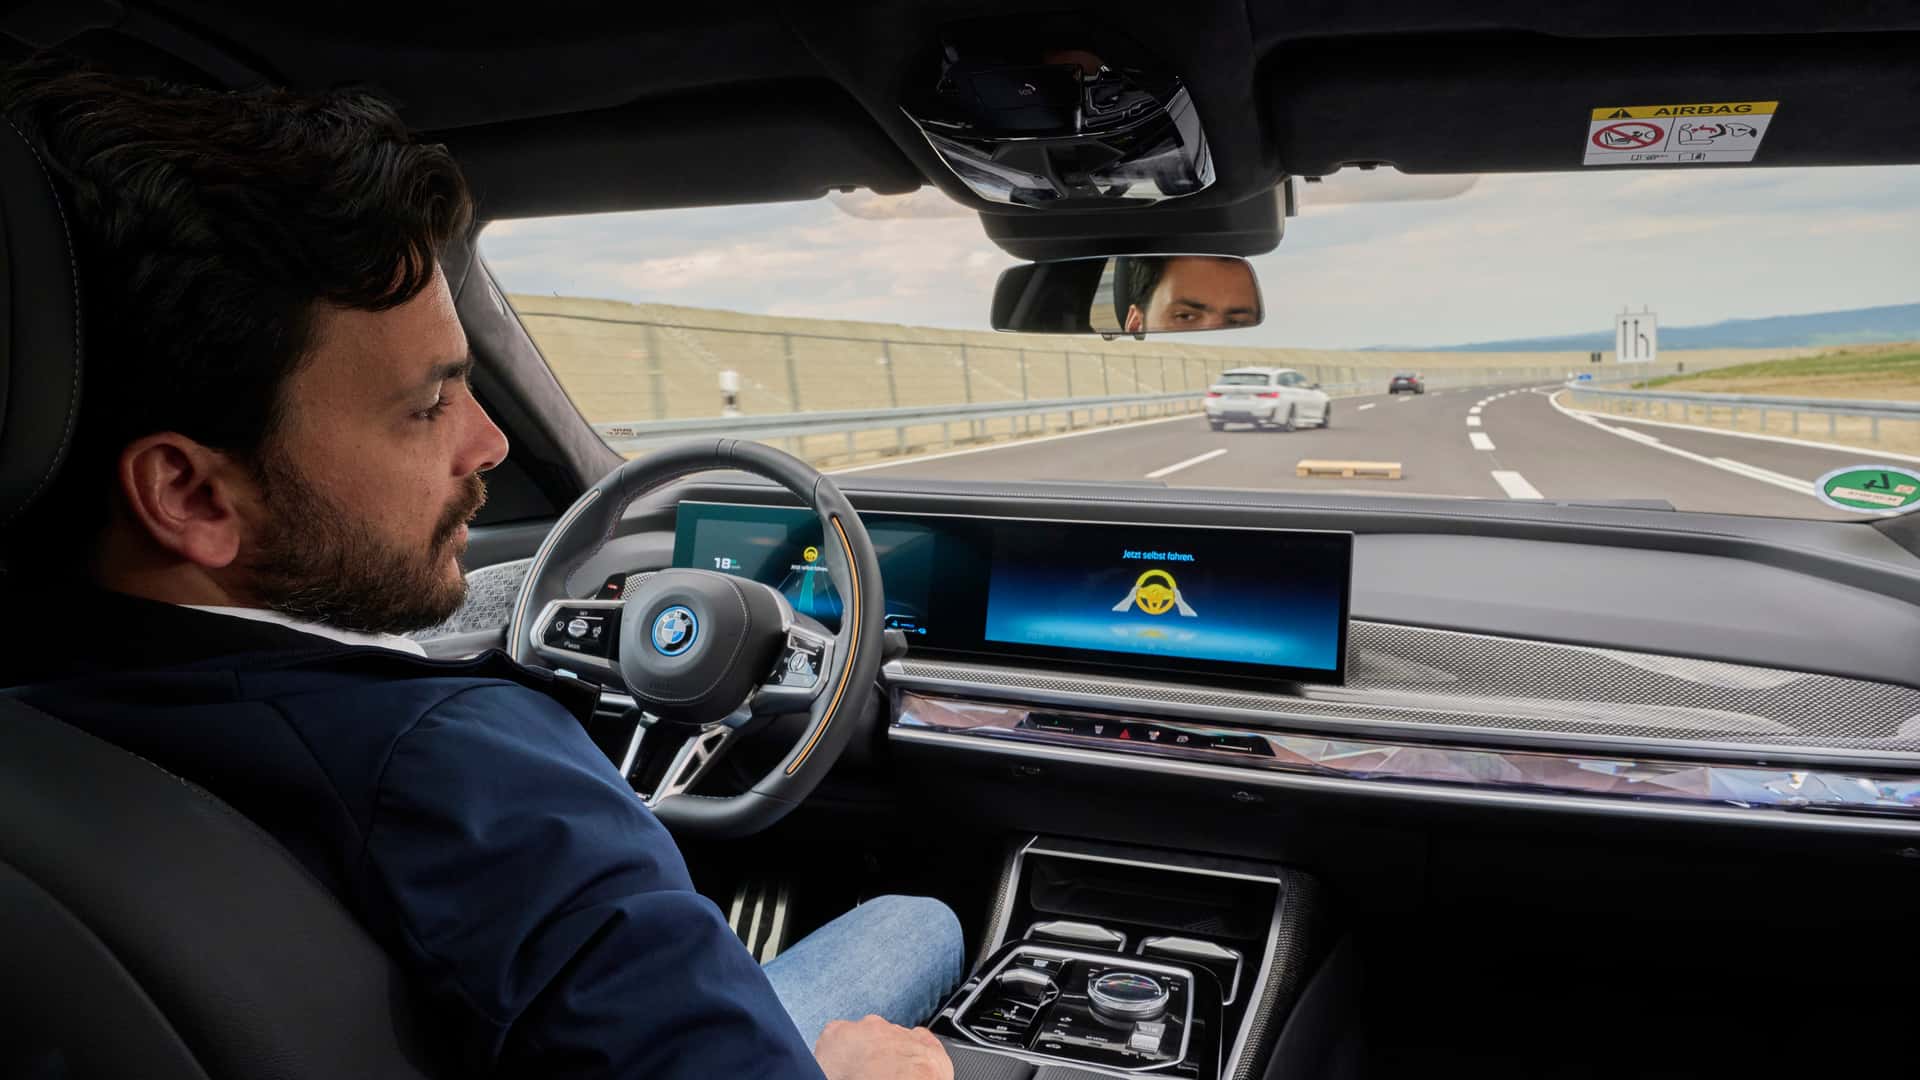 bmw’s $6,400 level 3 automated driving system goes live next year in germany